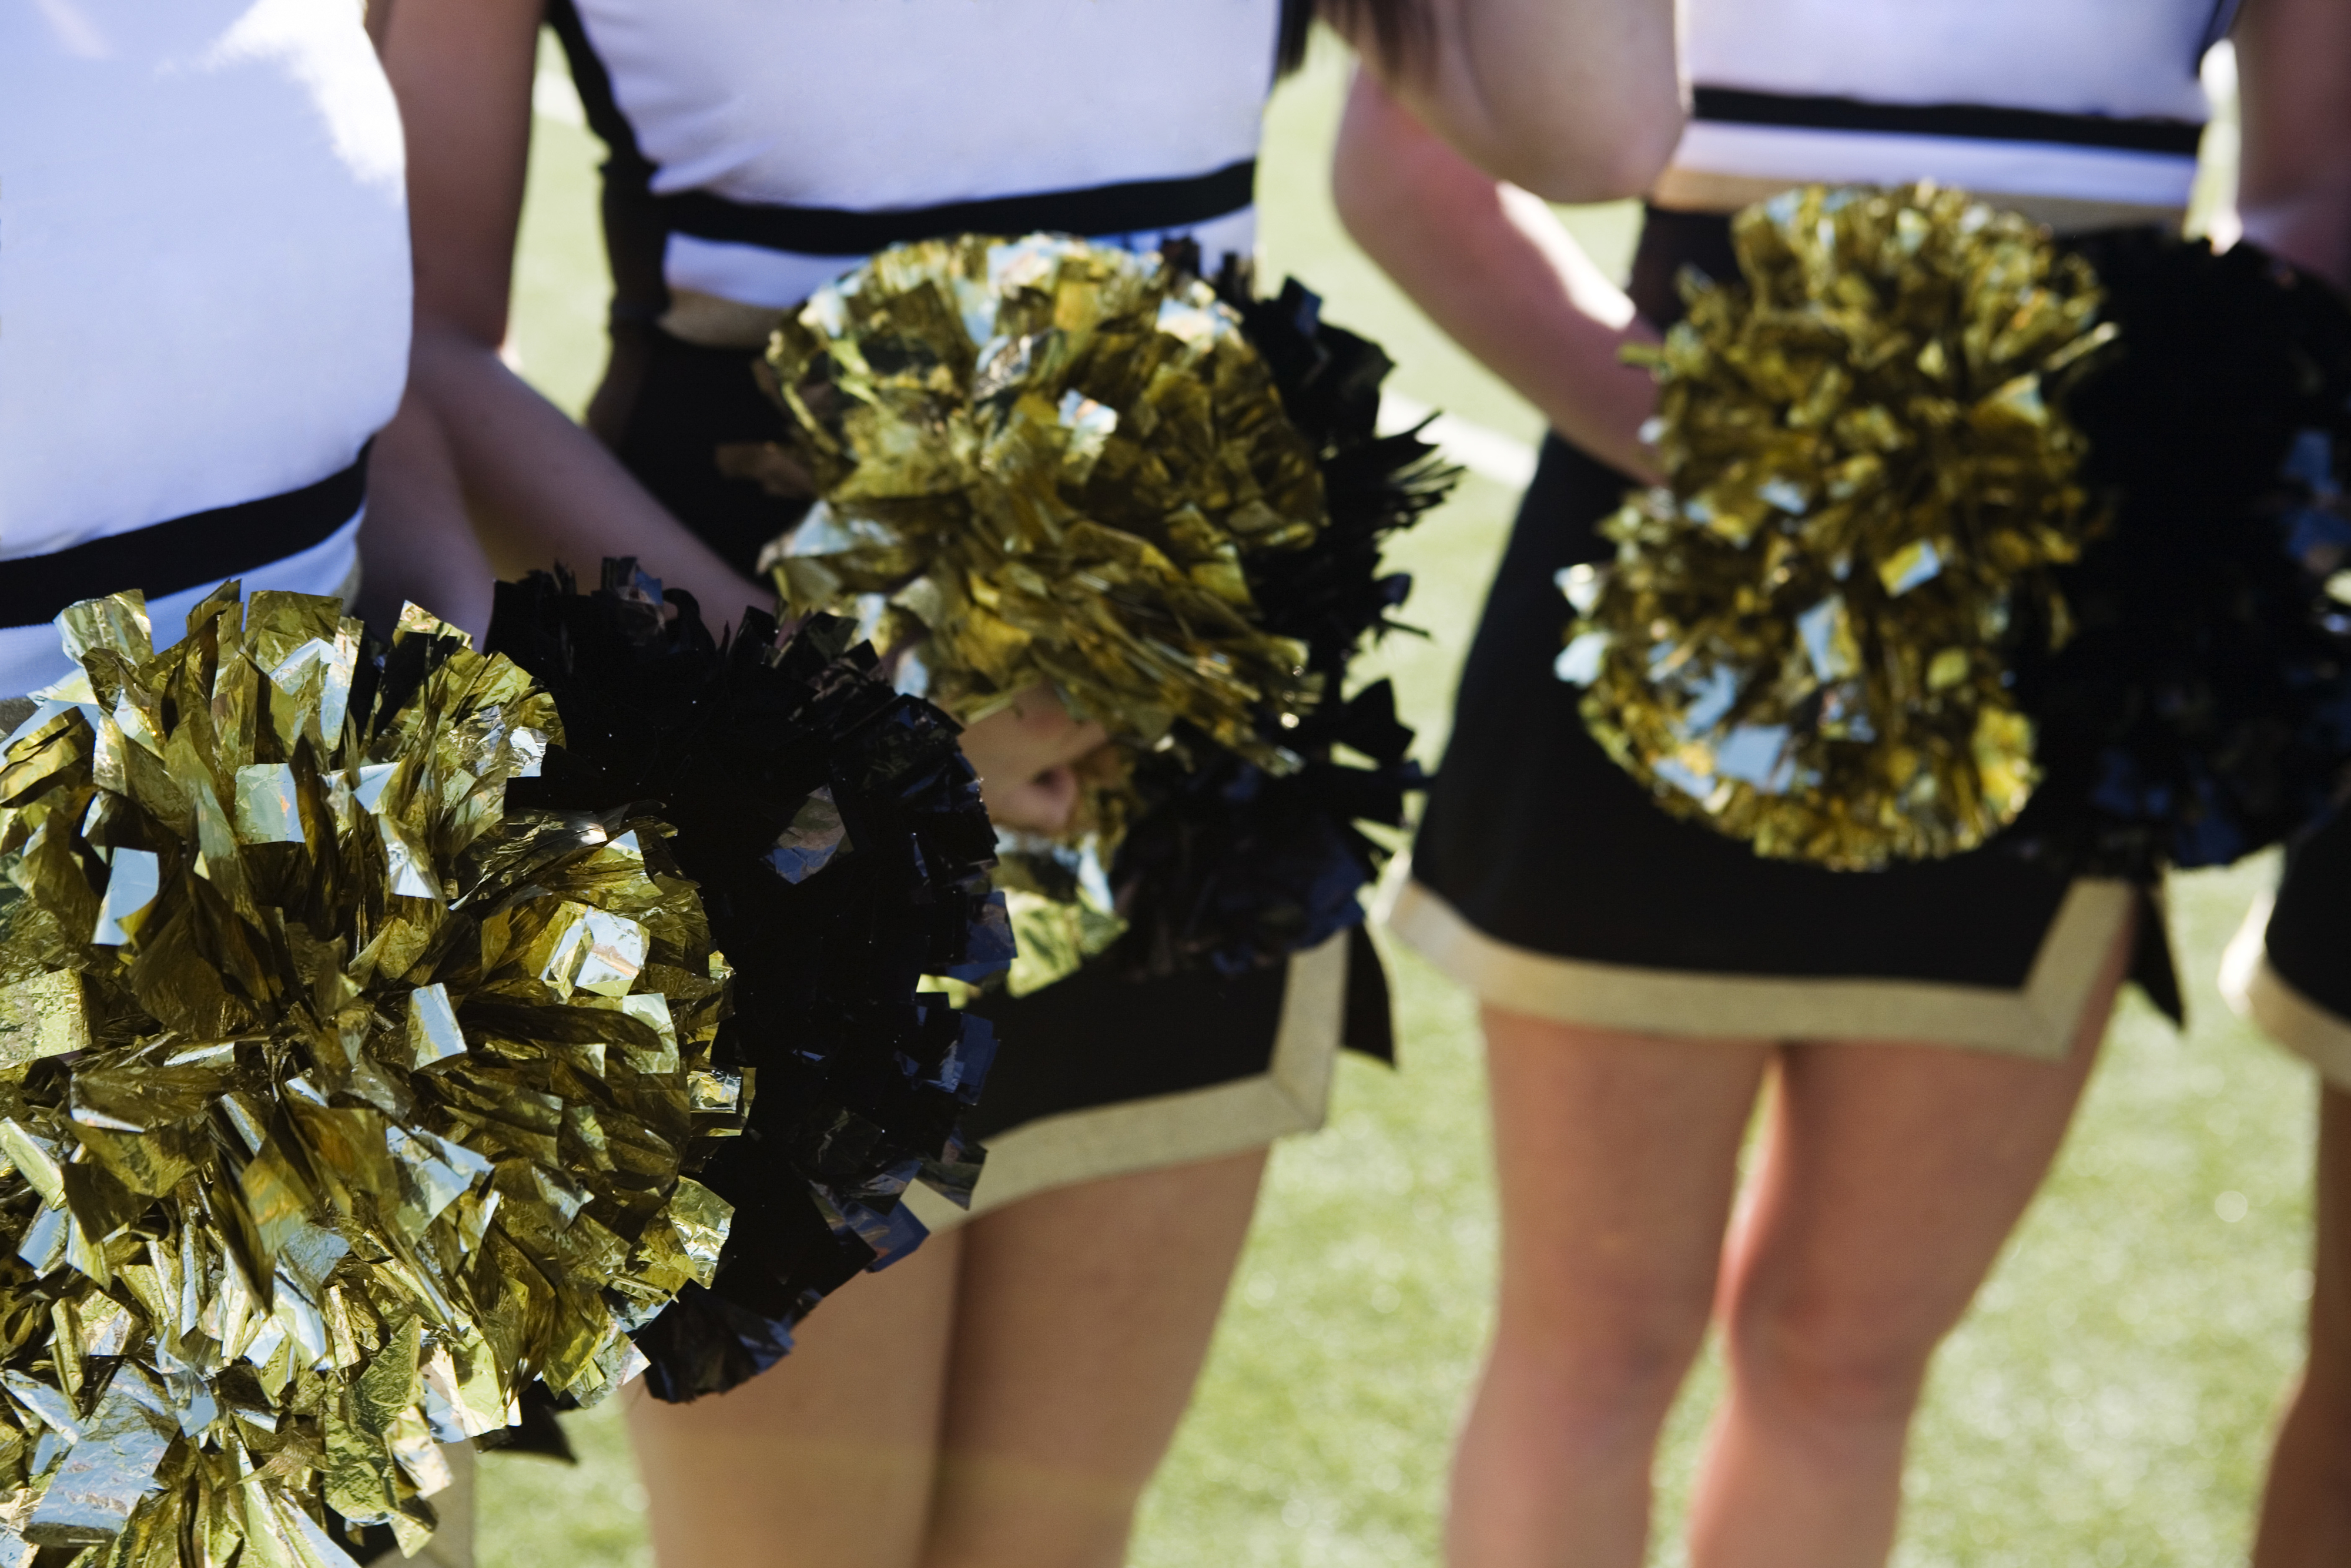 Cheerleaders holding gold and black pom-poms, focusing on team spirit at a work event